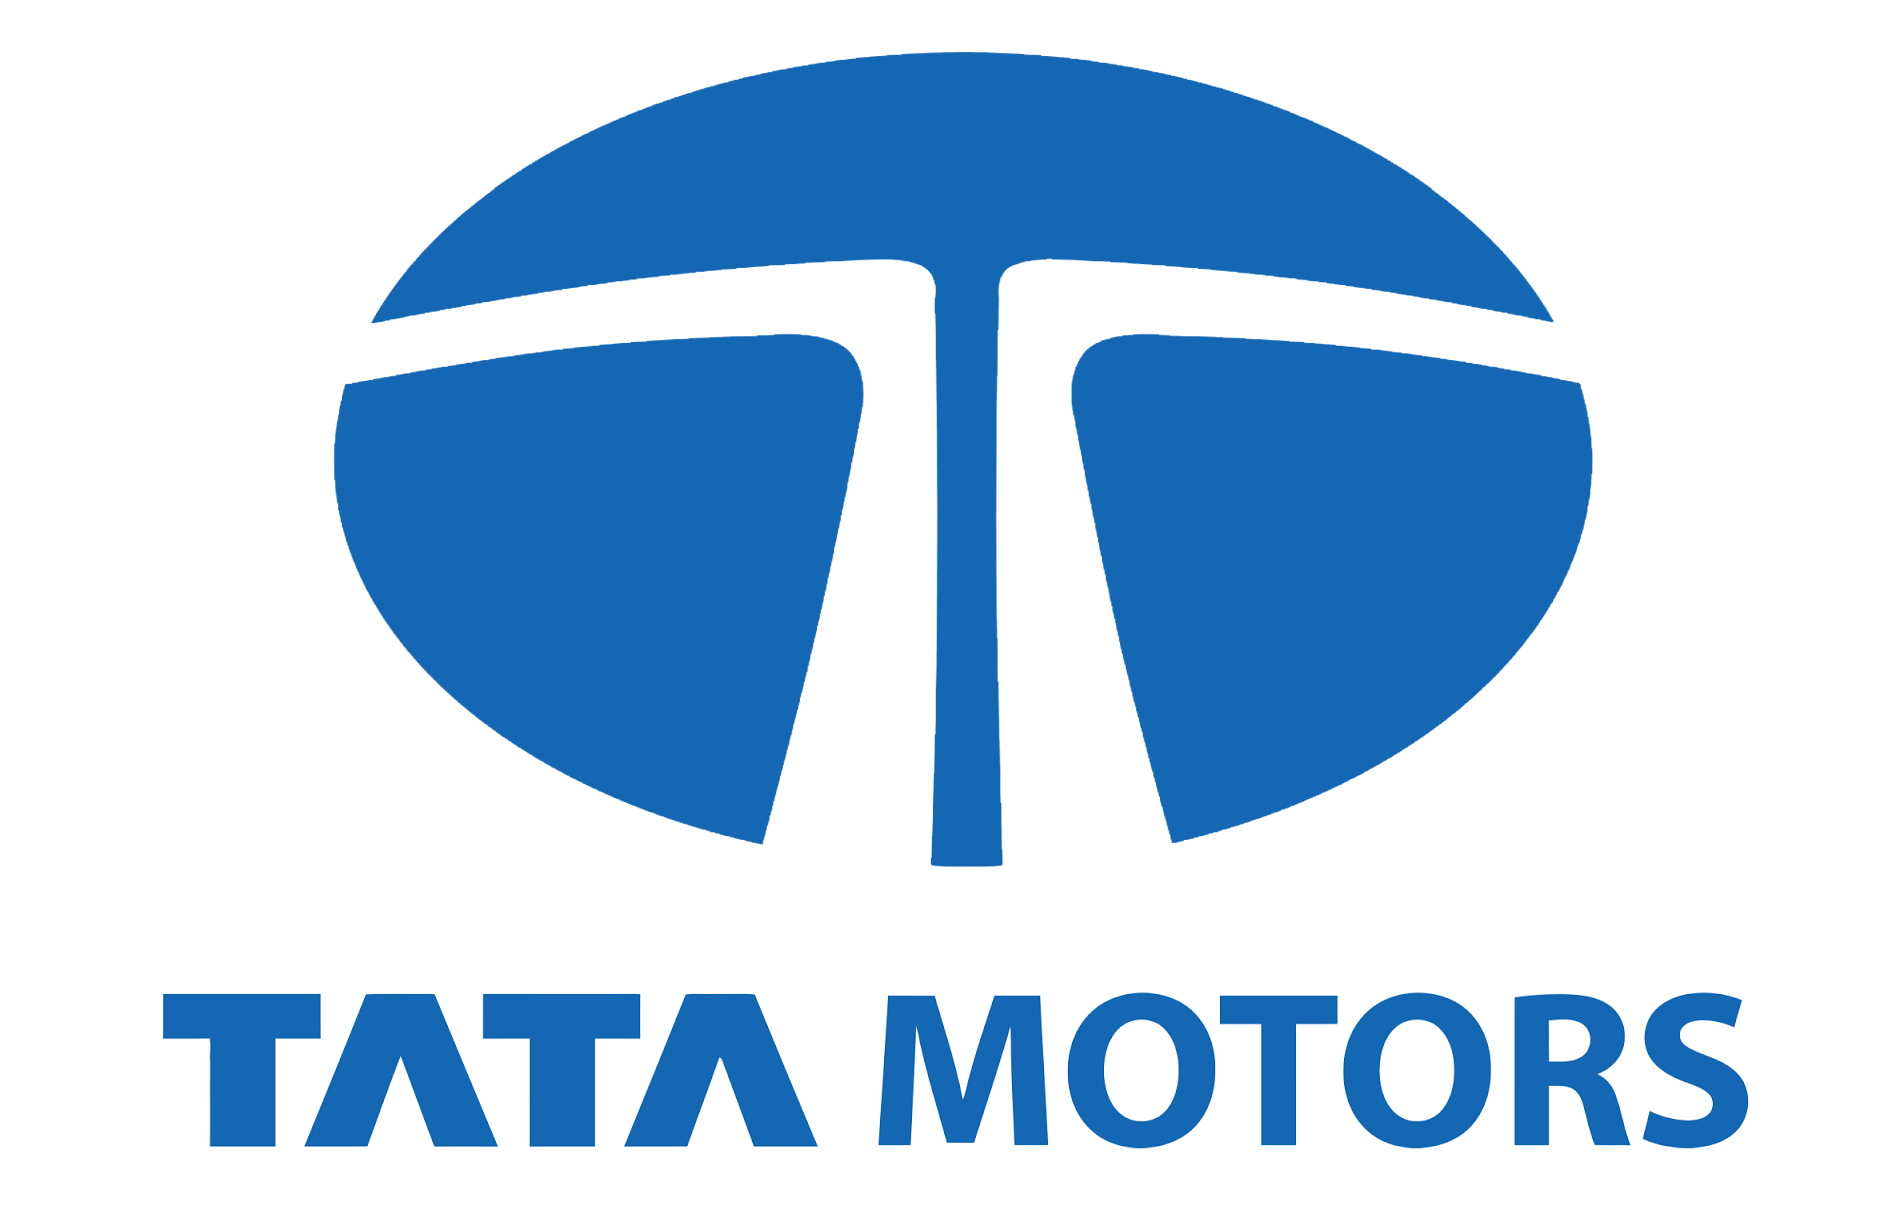 Tata Motors registered total sales of 2,43,387 units in Q2FY23; Grows by 42% over Q2FY22